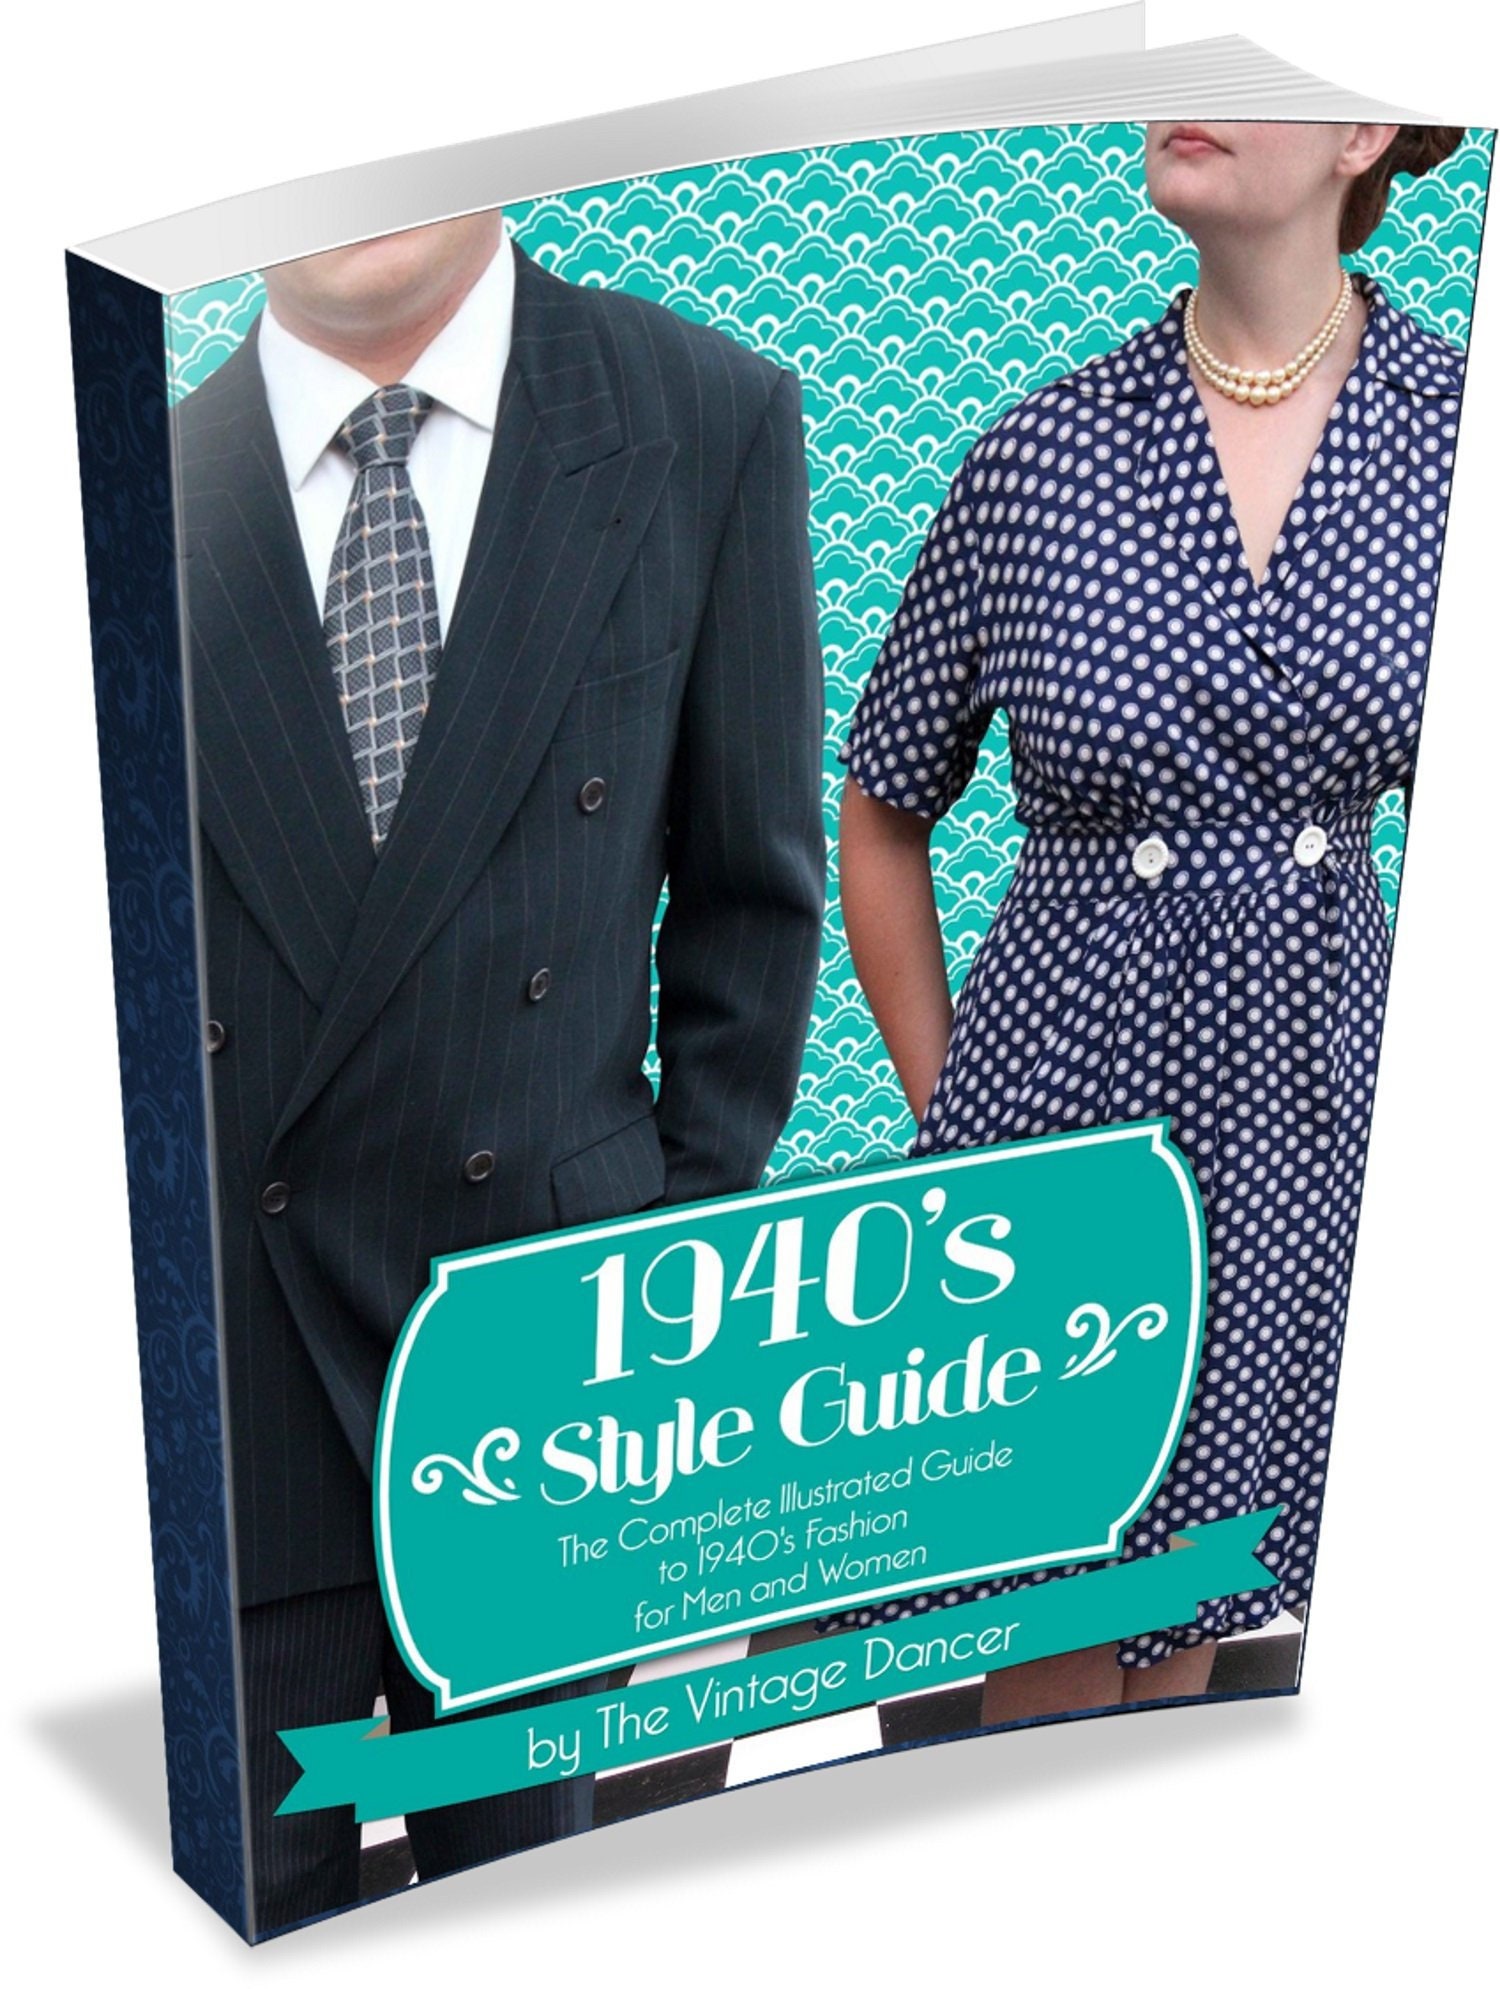 1940s Style Guide Ebook PDF Download 1940s Fashion History, Men's